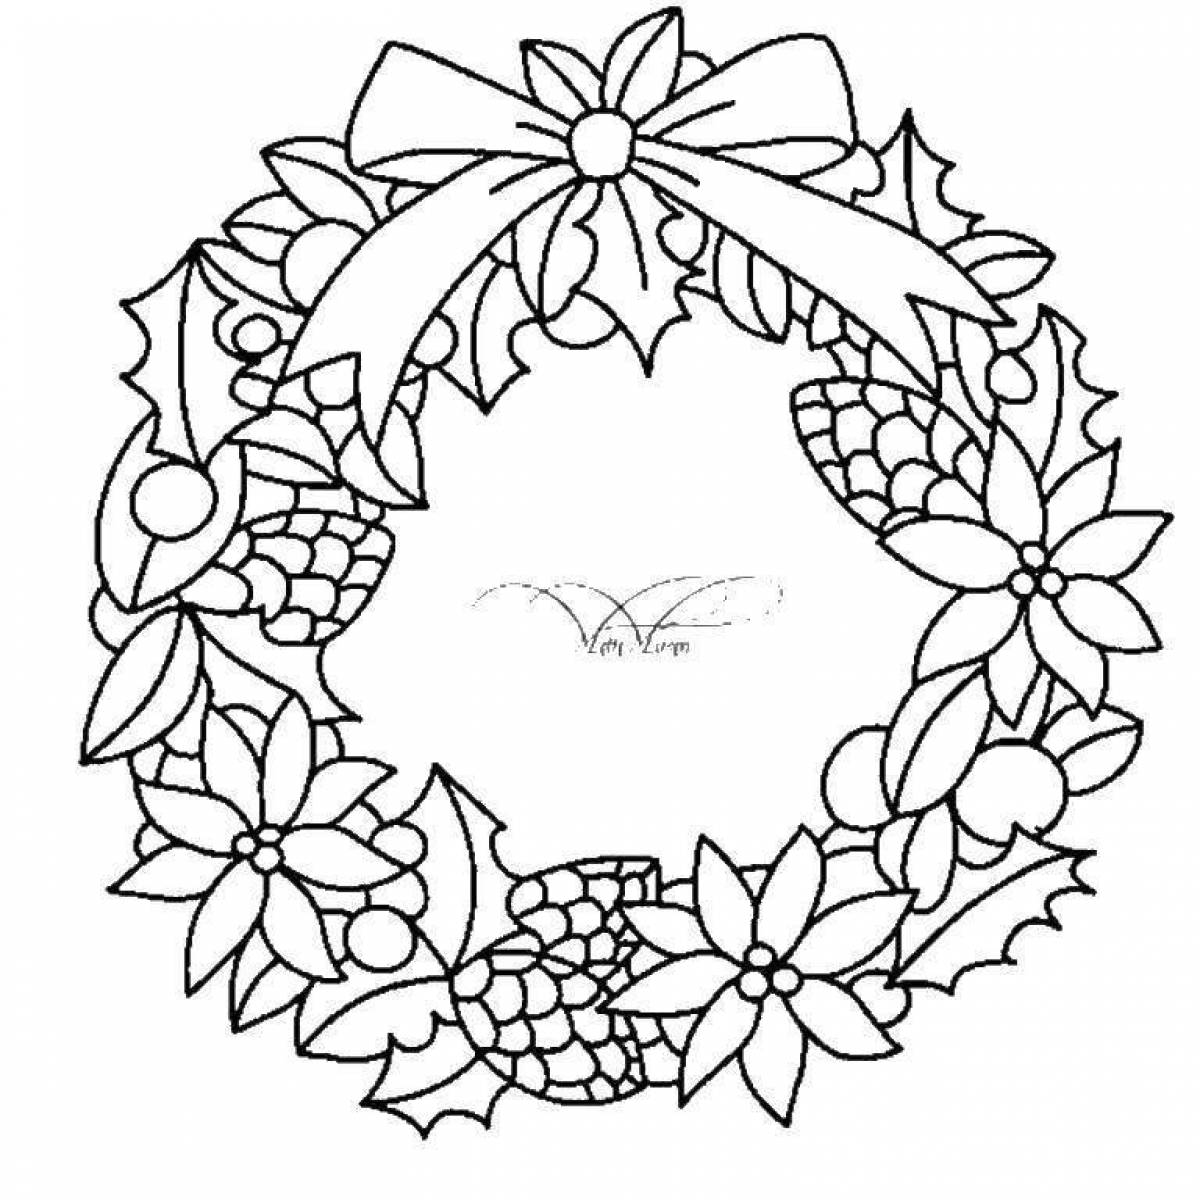 Intricate Christmas wreath coloring book